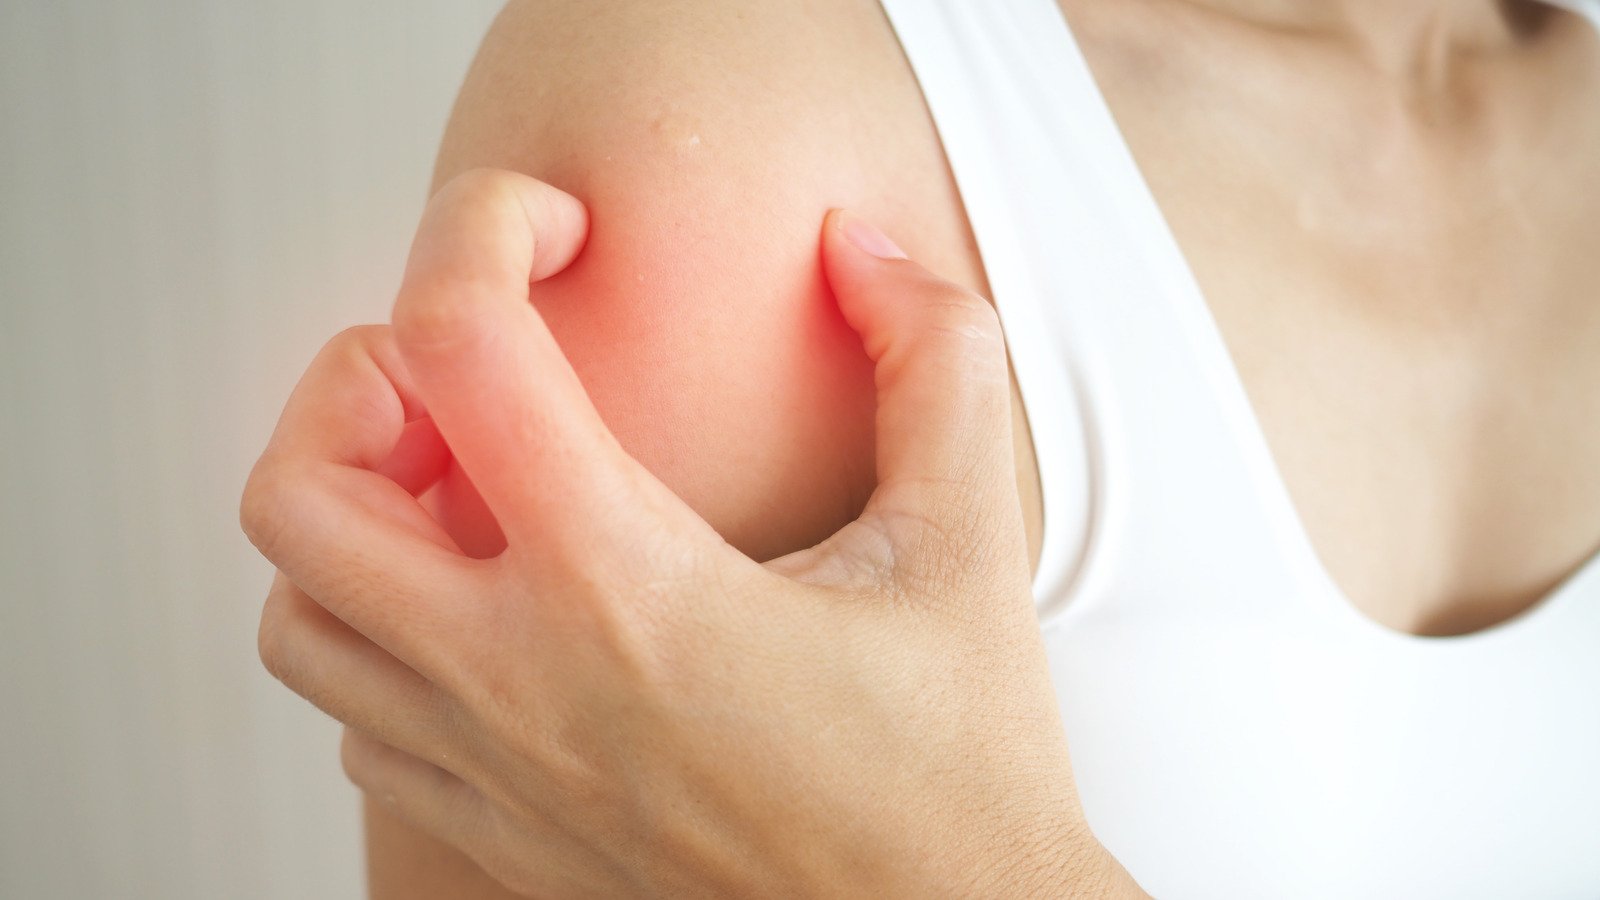 14 Things That Could Be Causing Your Itchy Skin